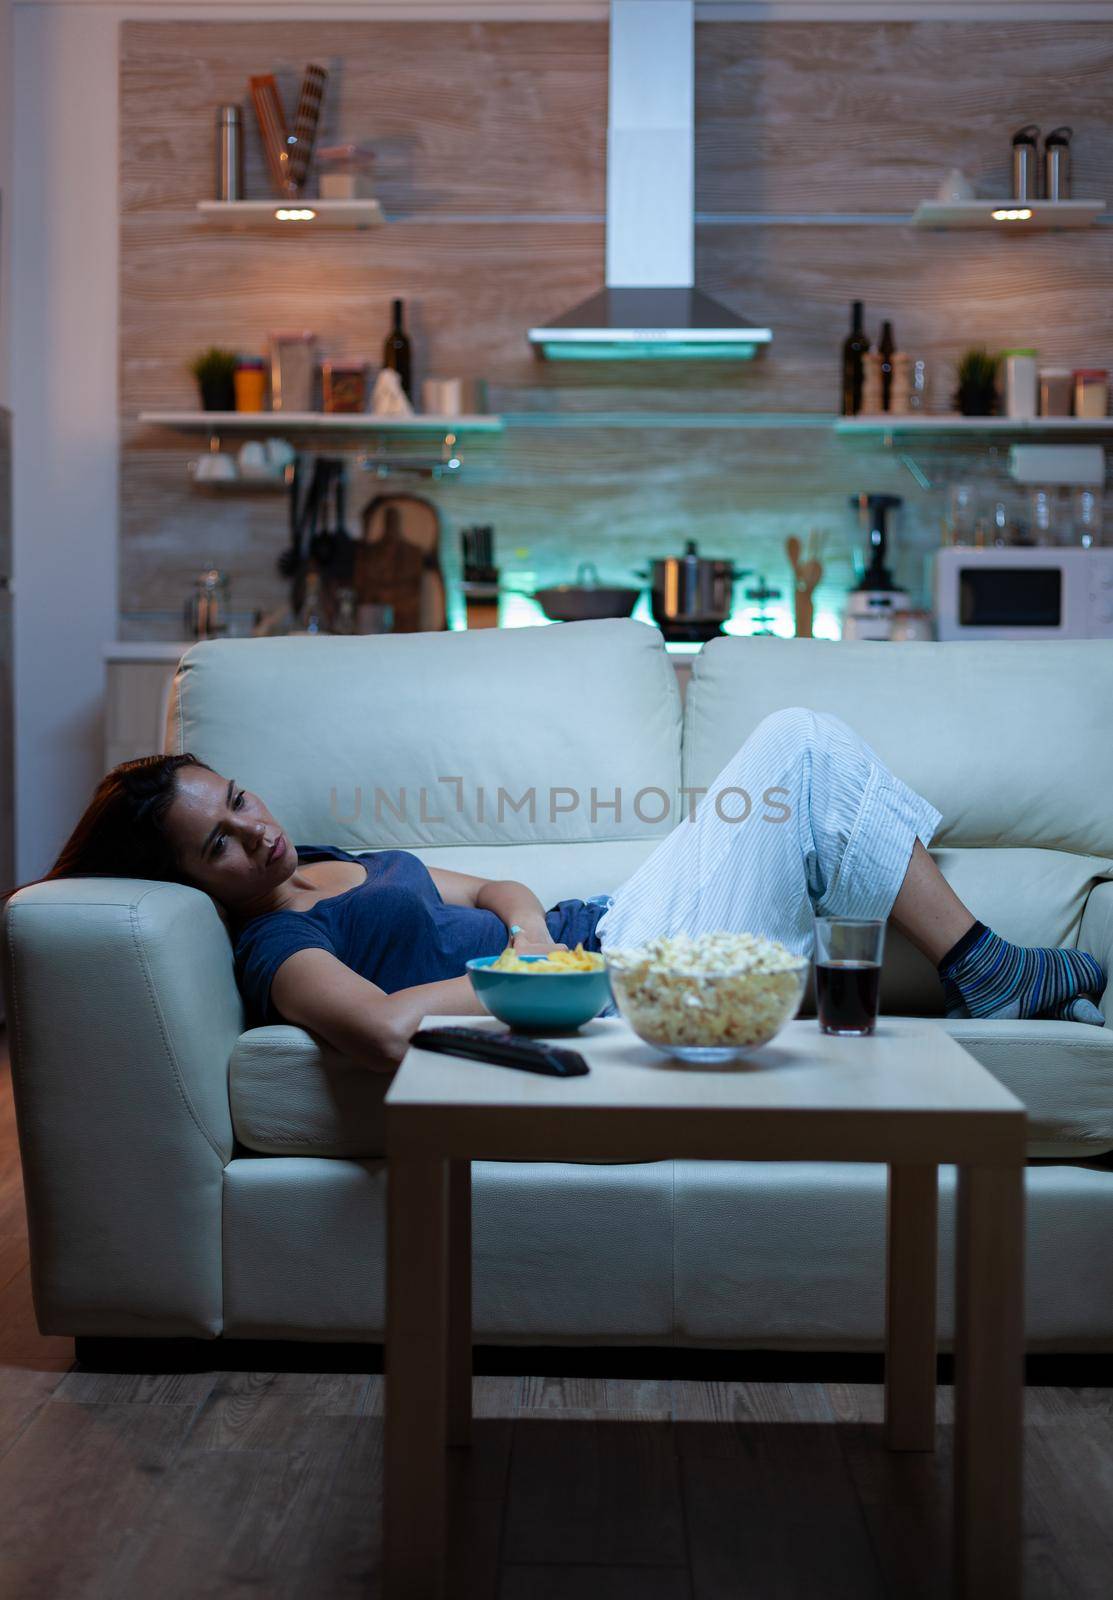 Exhausted woman watching tv show by DCStudio